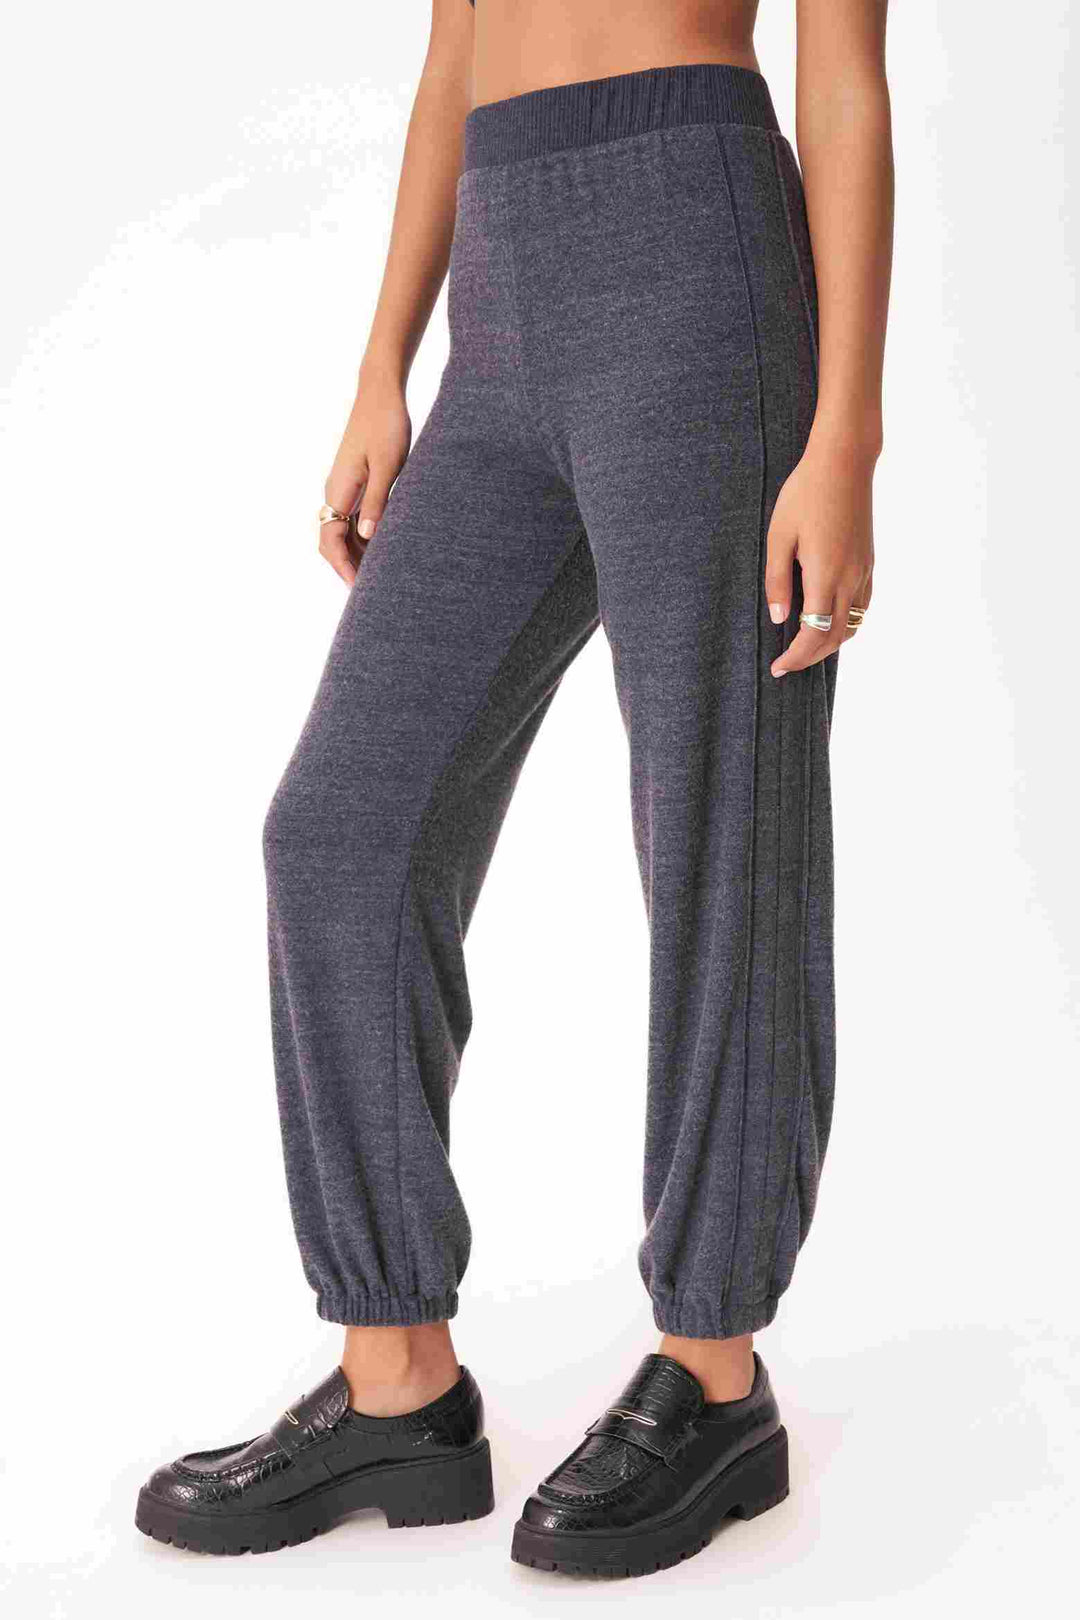 JUST RELAX COZY SEAMED JOGGER-H GALAXY BLUE - Kingfisher Road - Online Boutique